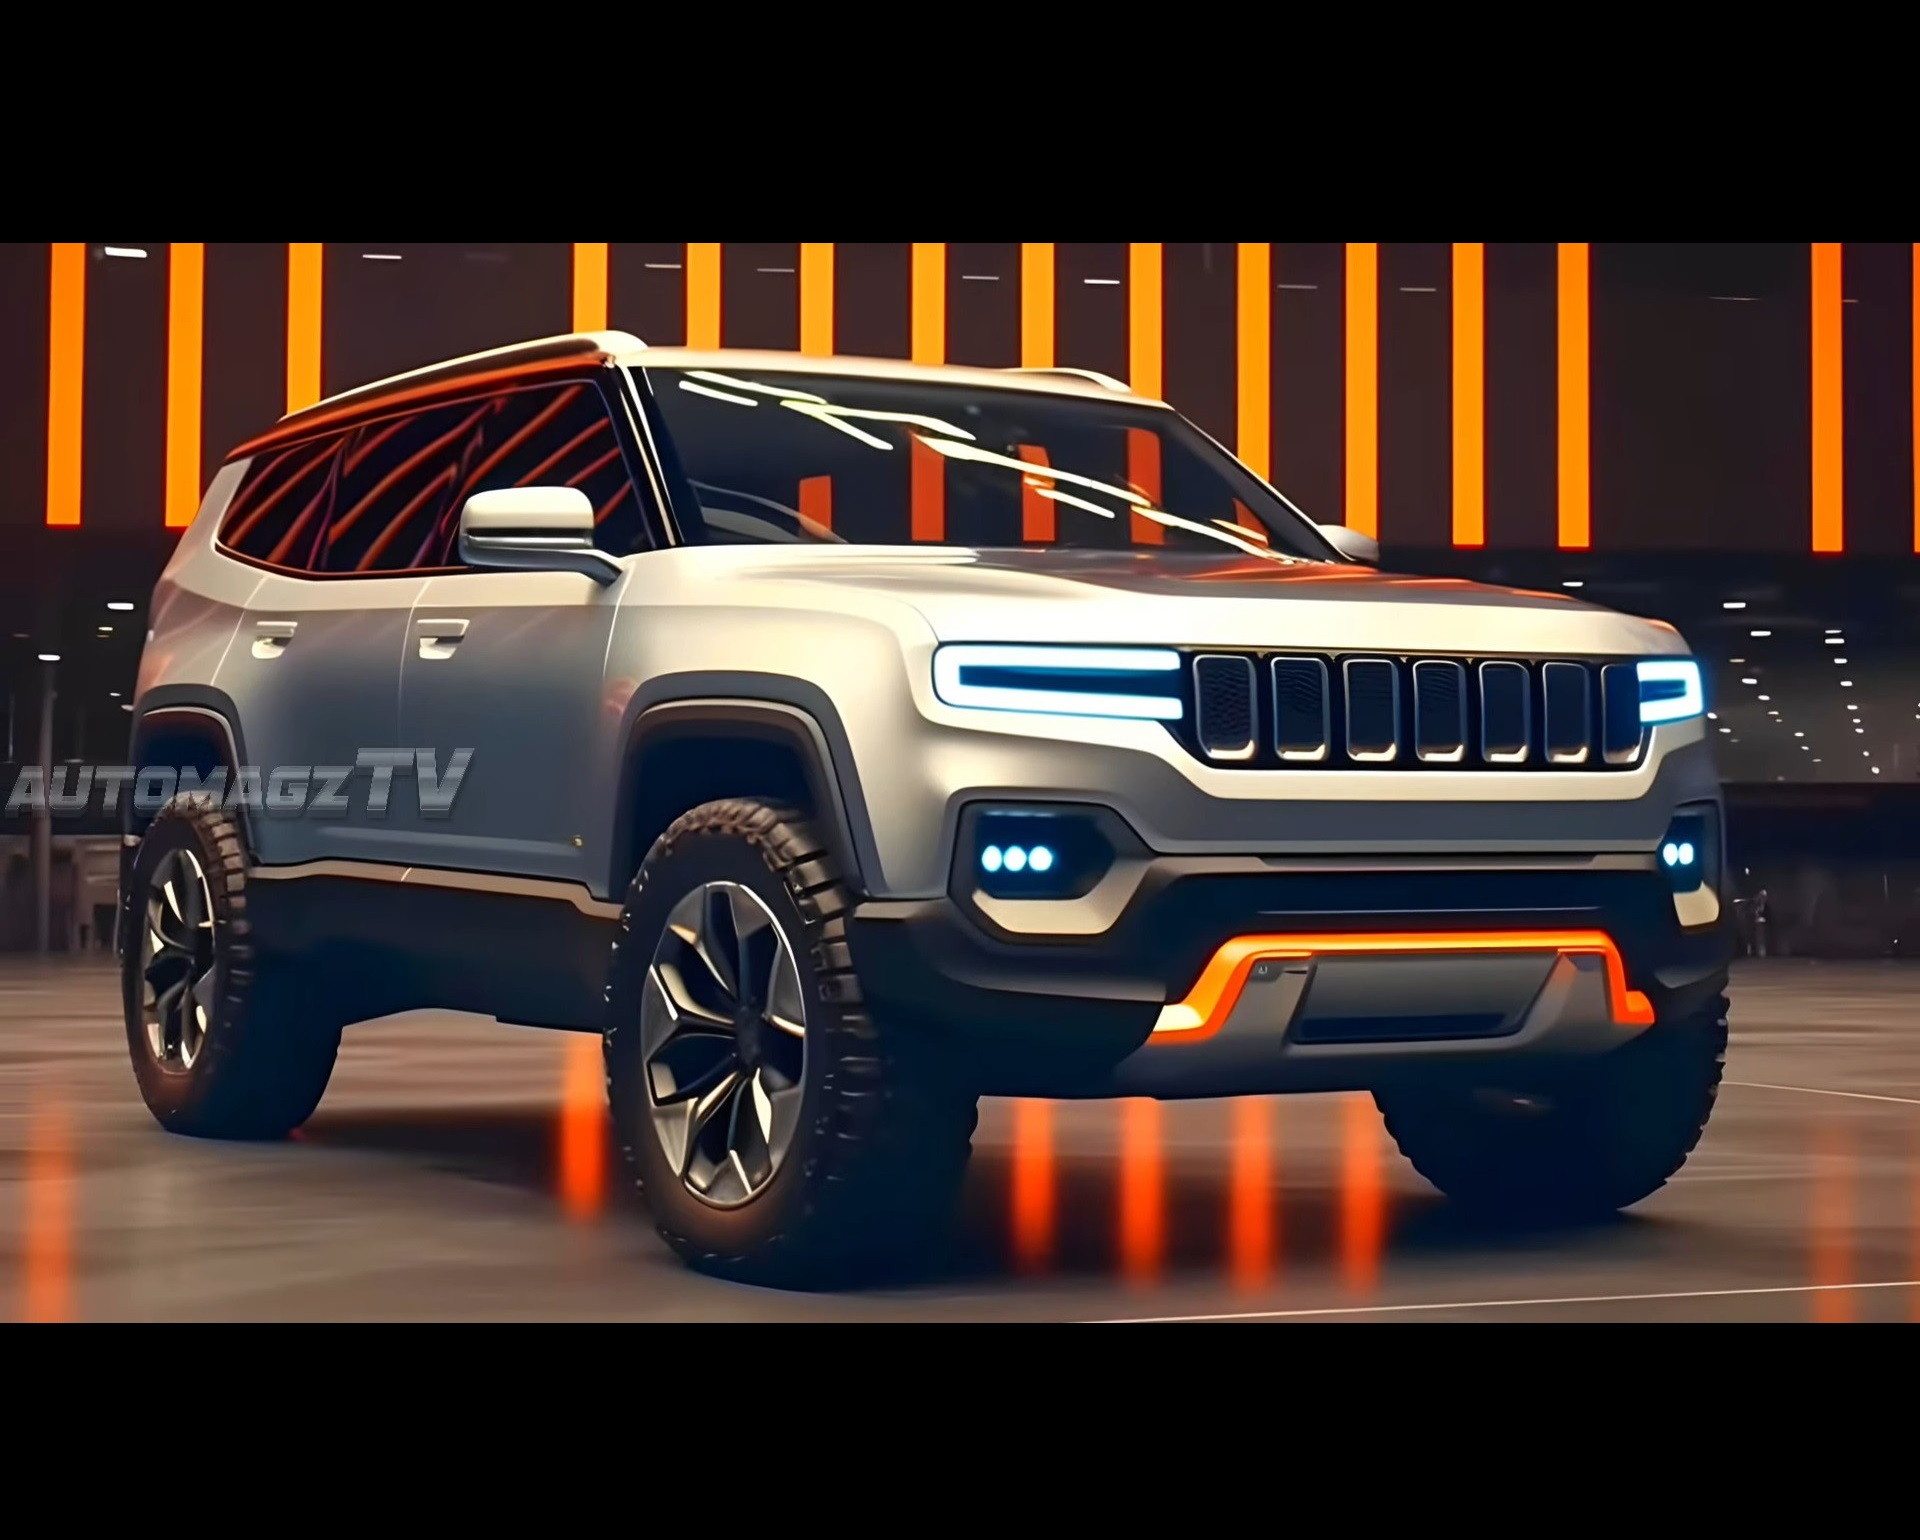 https://s1.cdn.autoevolution.com/images/news/new-2025-jeep-grand-cherokee-looks-like-a-military-grade-off-roader-too-bad-it-s-fake-225140_1.jpg